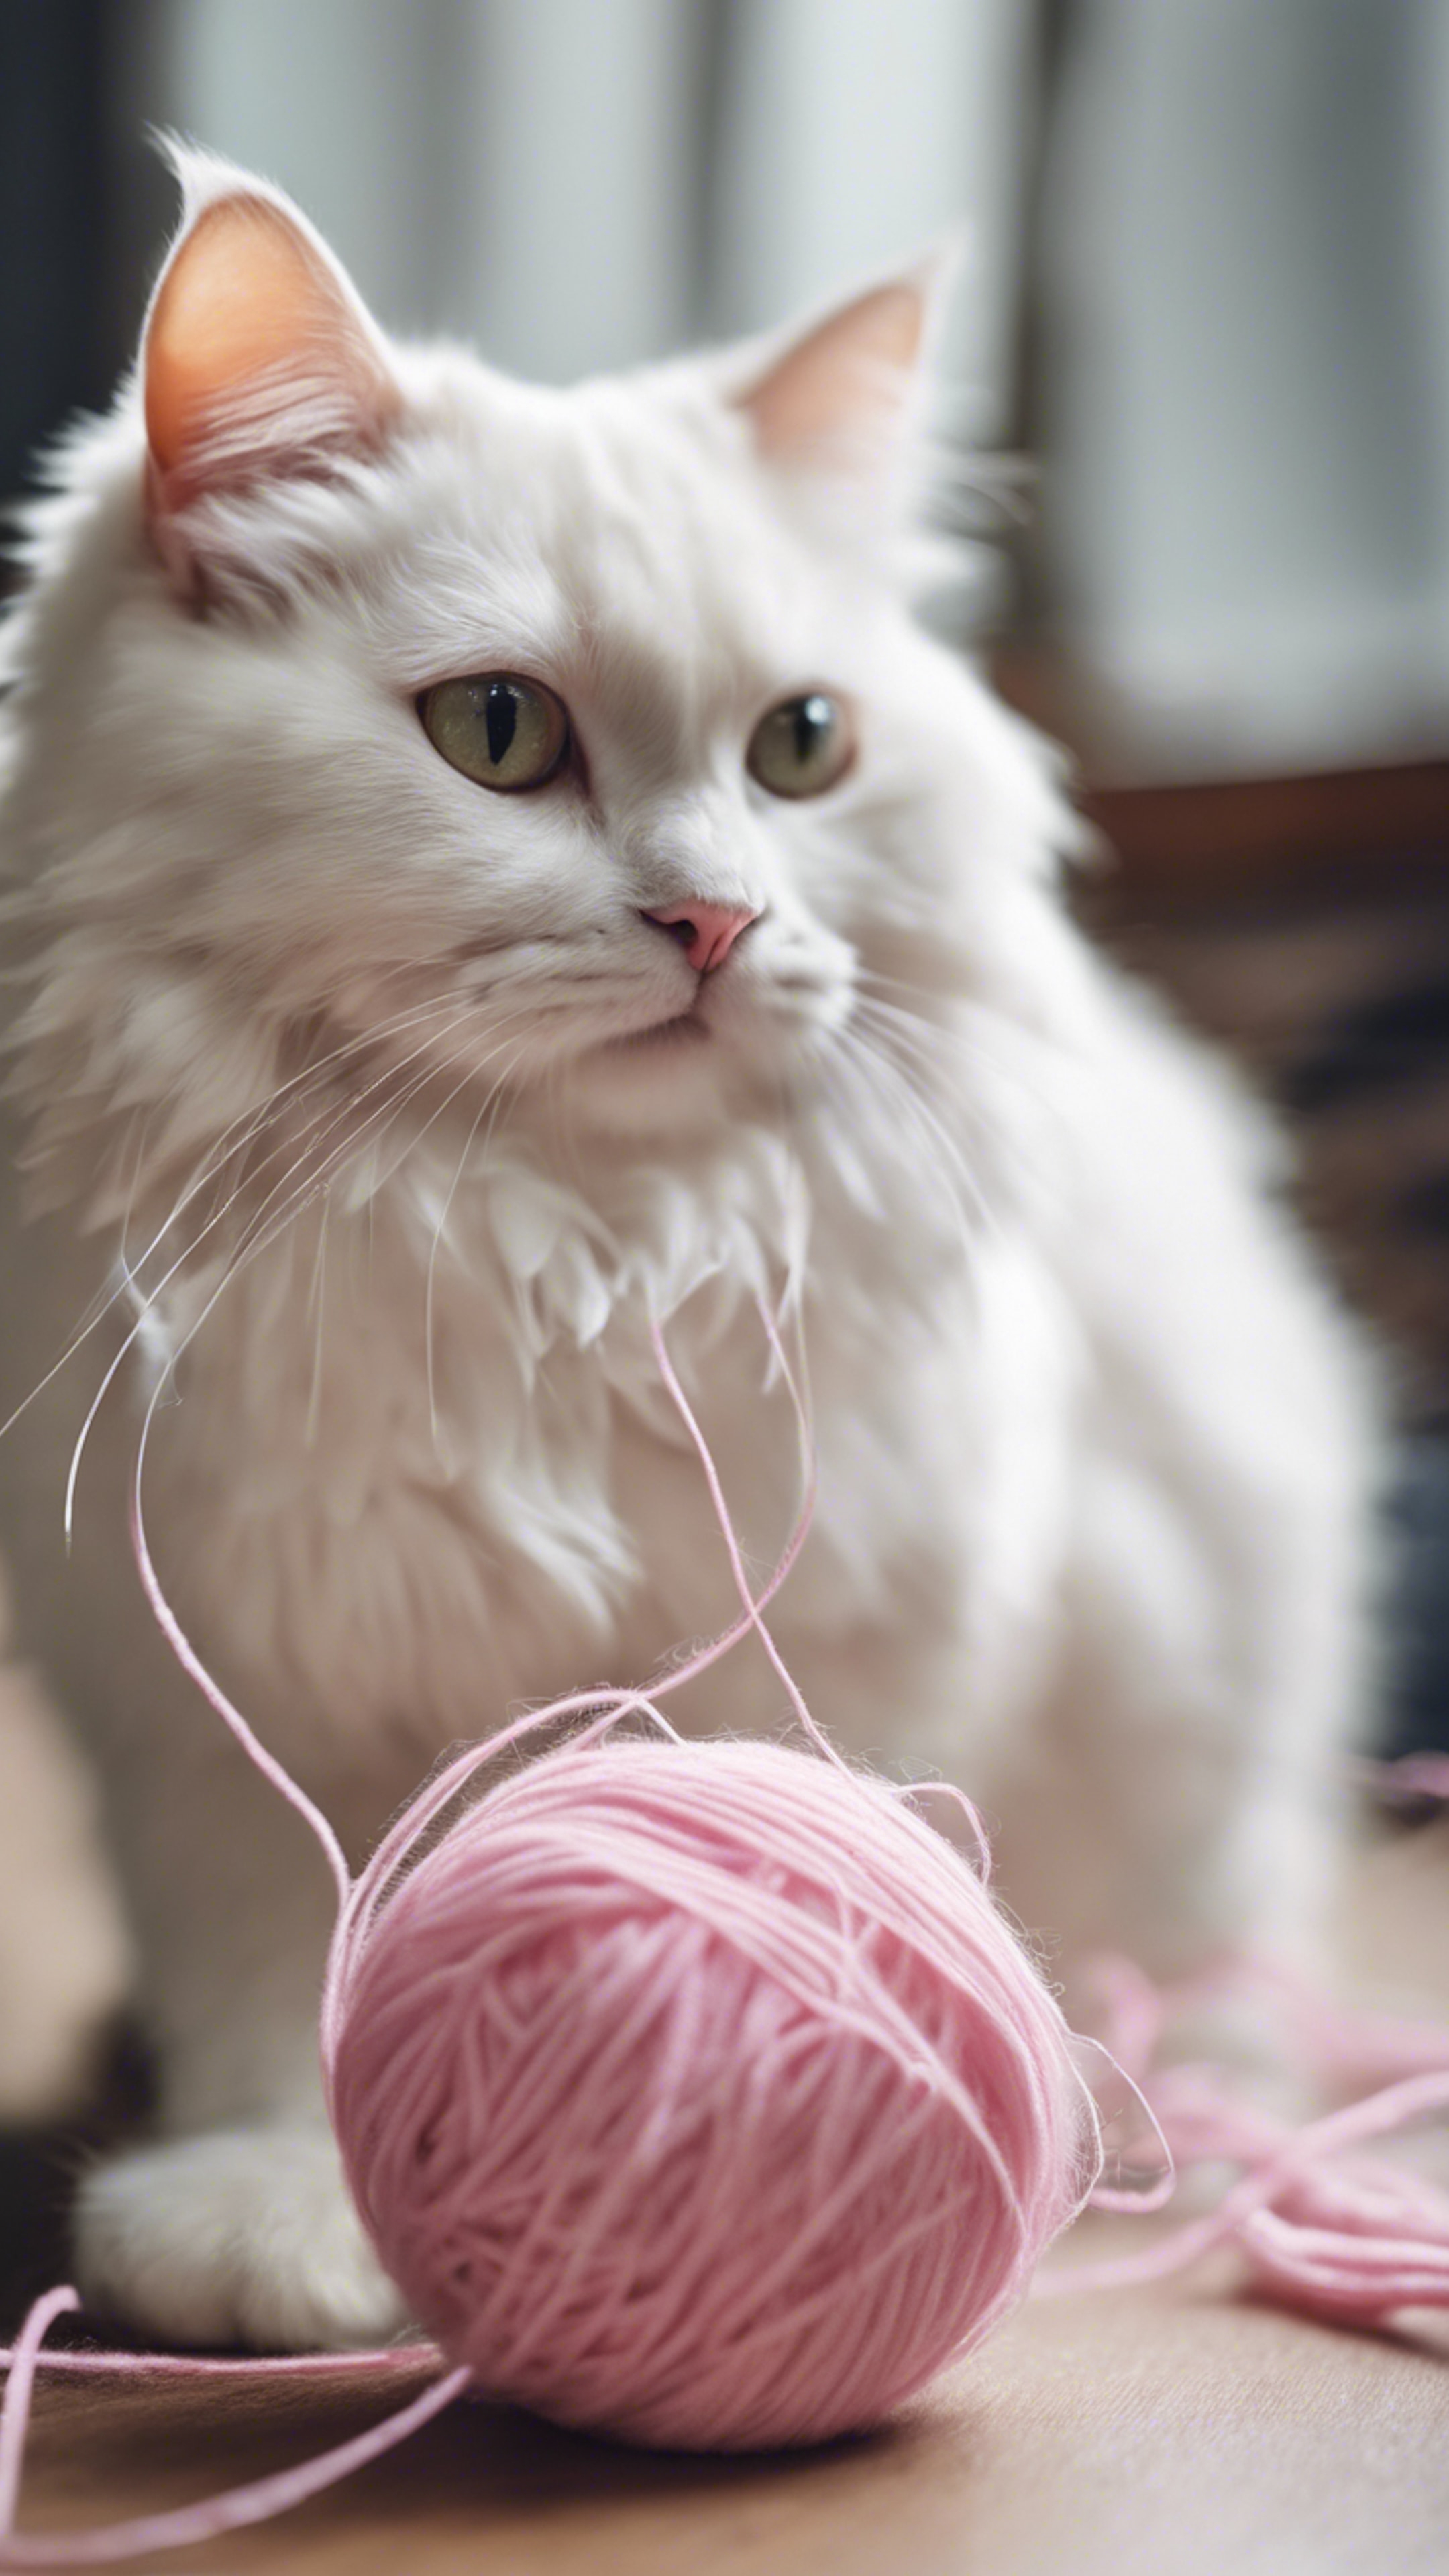 An adorable white cat, fluff all around, playing with a pink ball of yarn. Fond d'écran[2f9056787526421e963d]